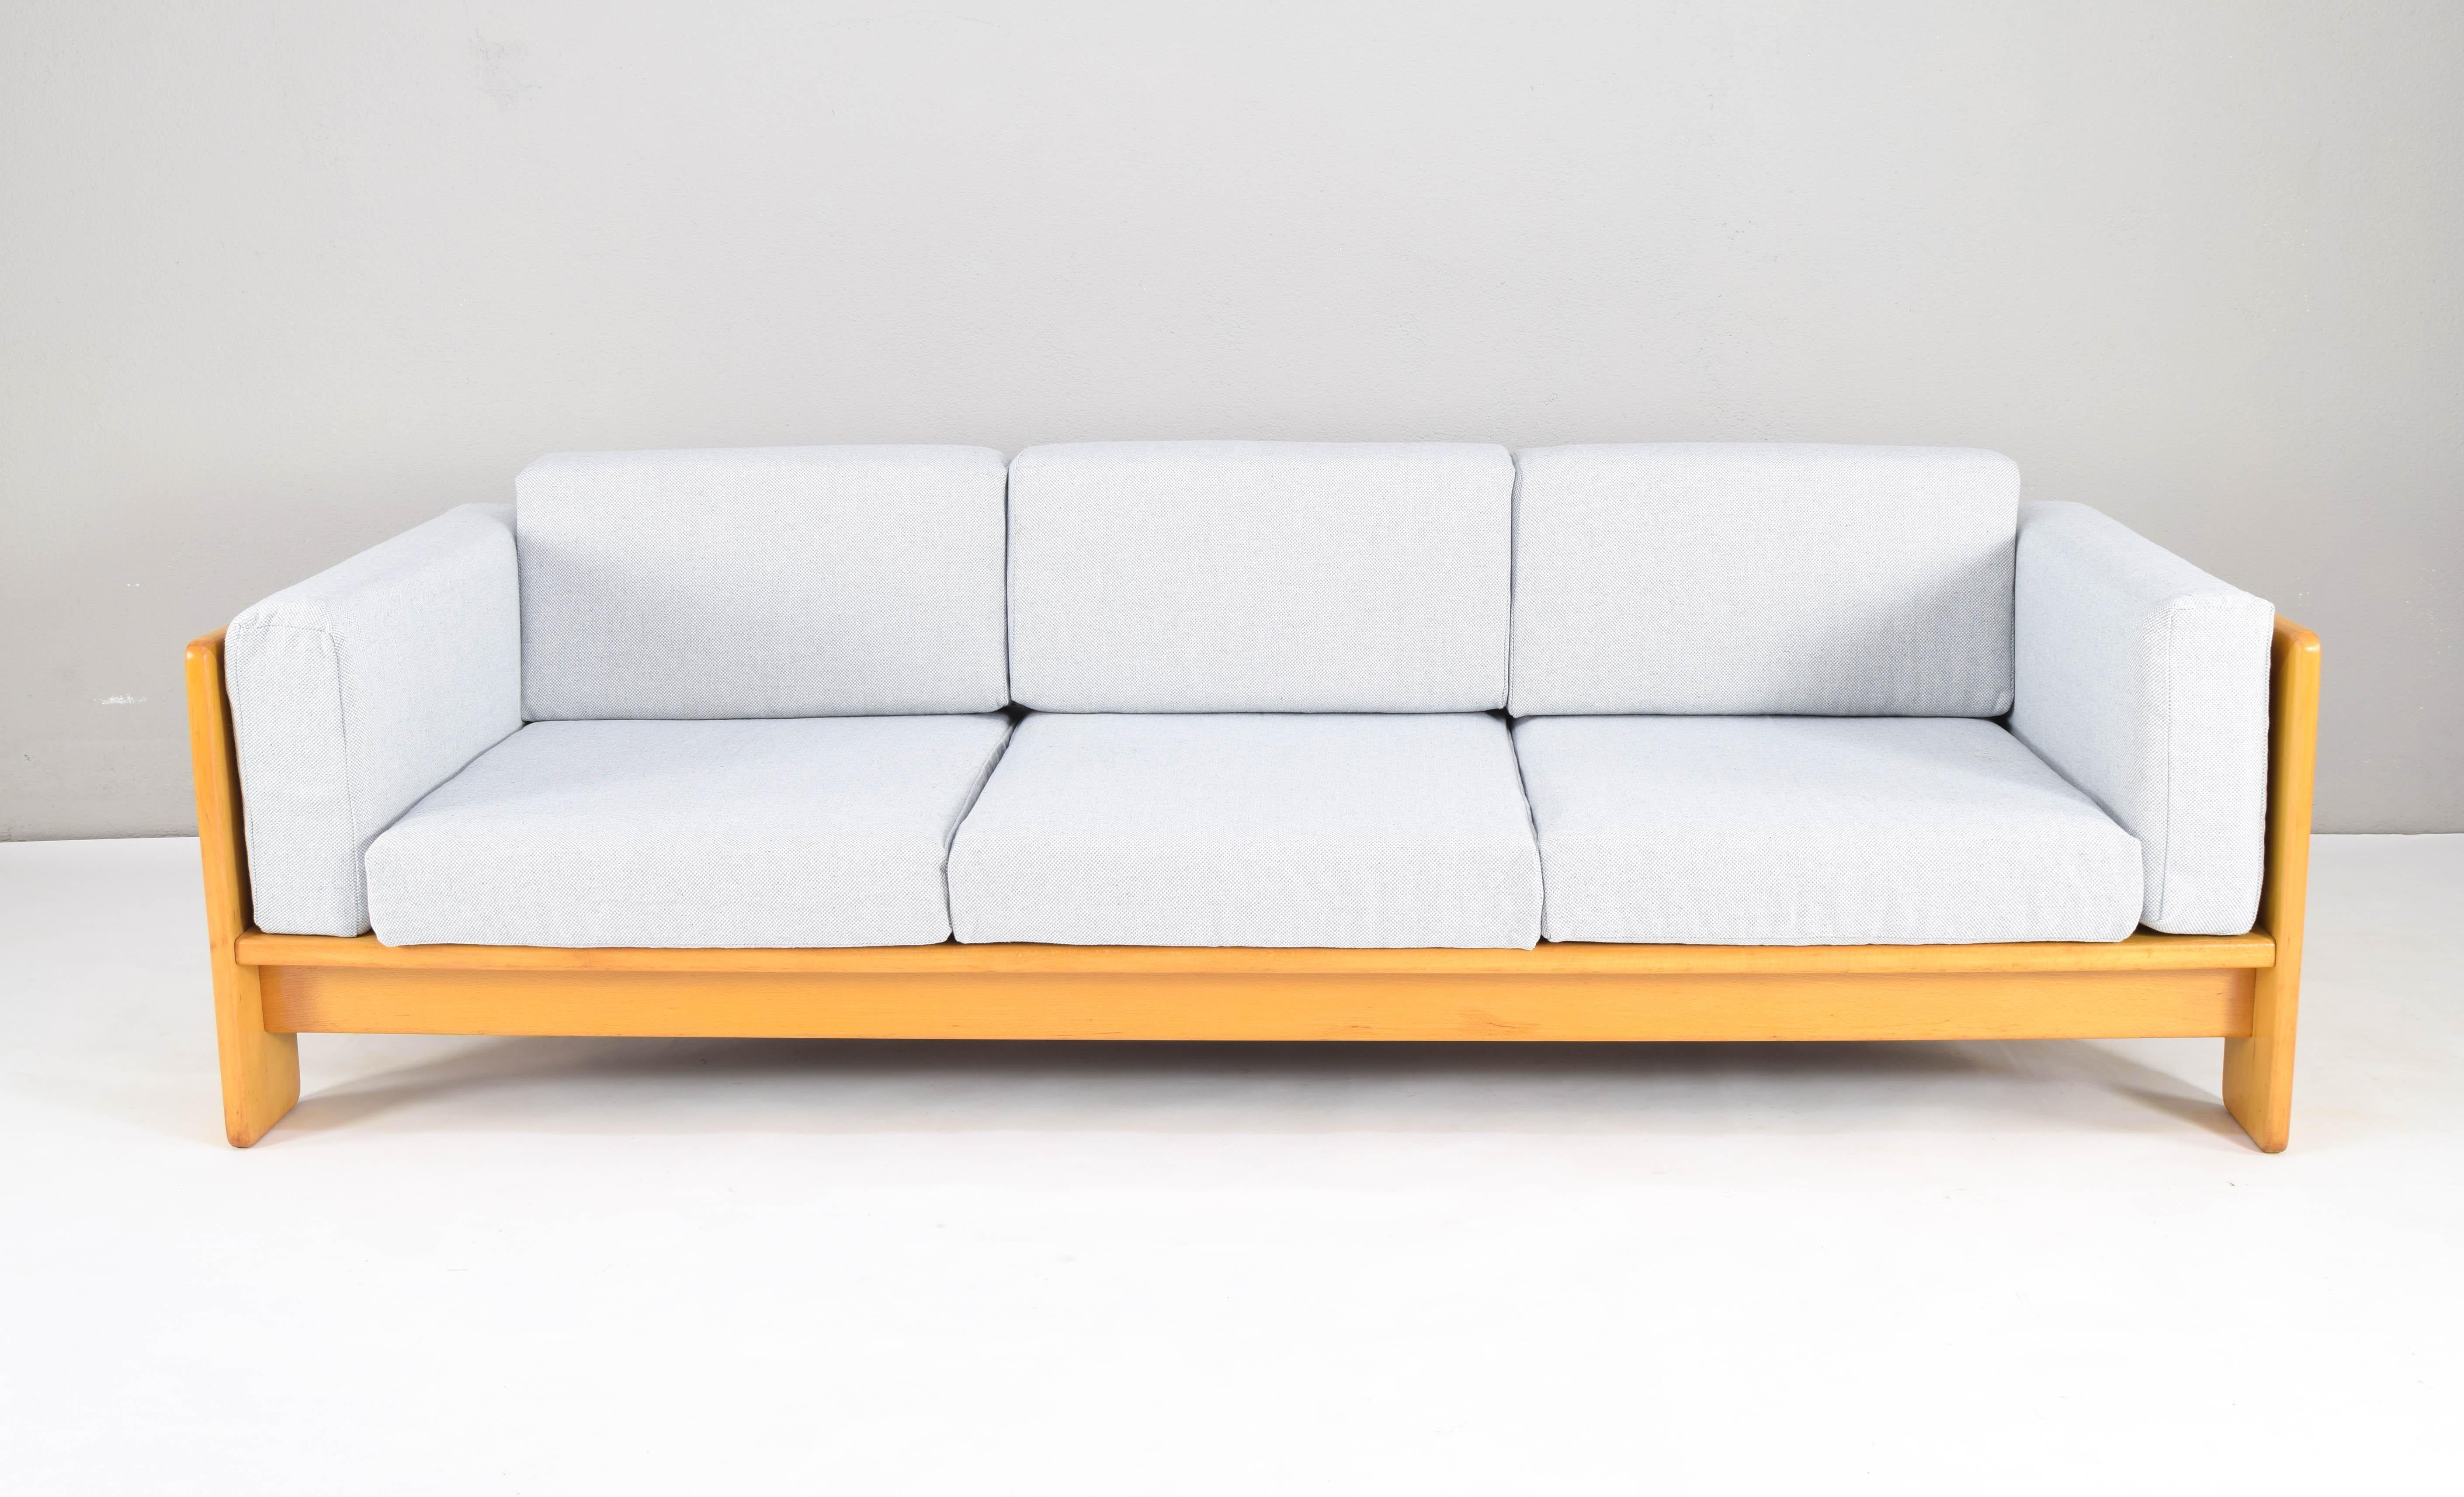 Beautiful and popular piece made by MYC Gavina Spain and designed by Afra & Tobia Scarpa in the 60s.
This three-seater sofa is a classic of Italian design, with its clean lines that combine robustness and elegance in equal measure.
This piece is